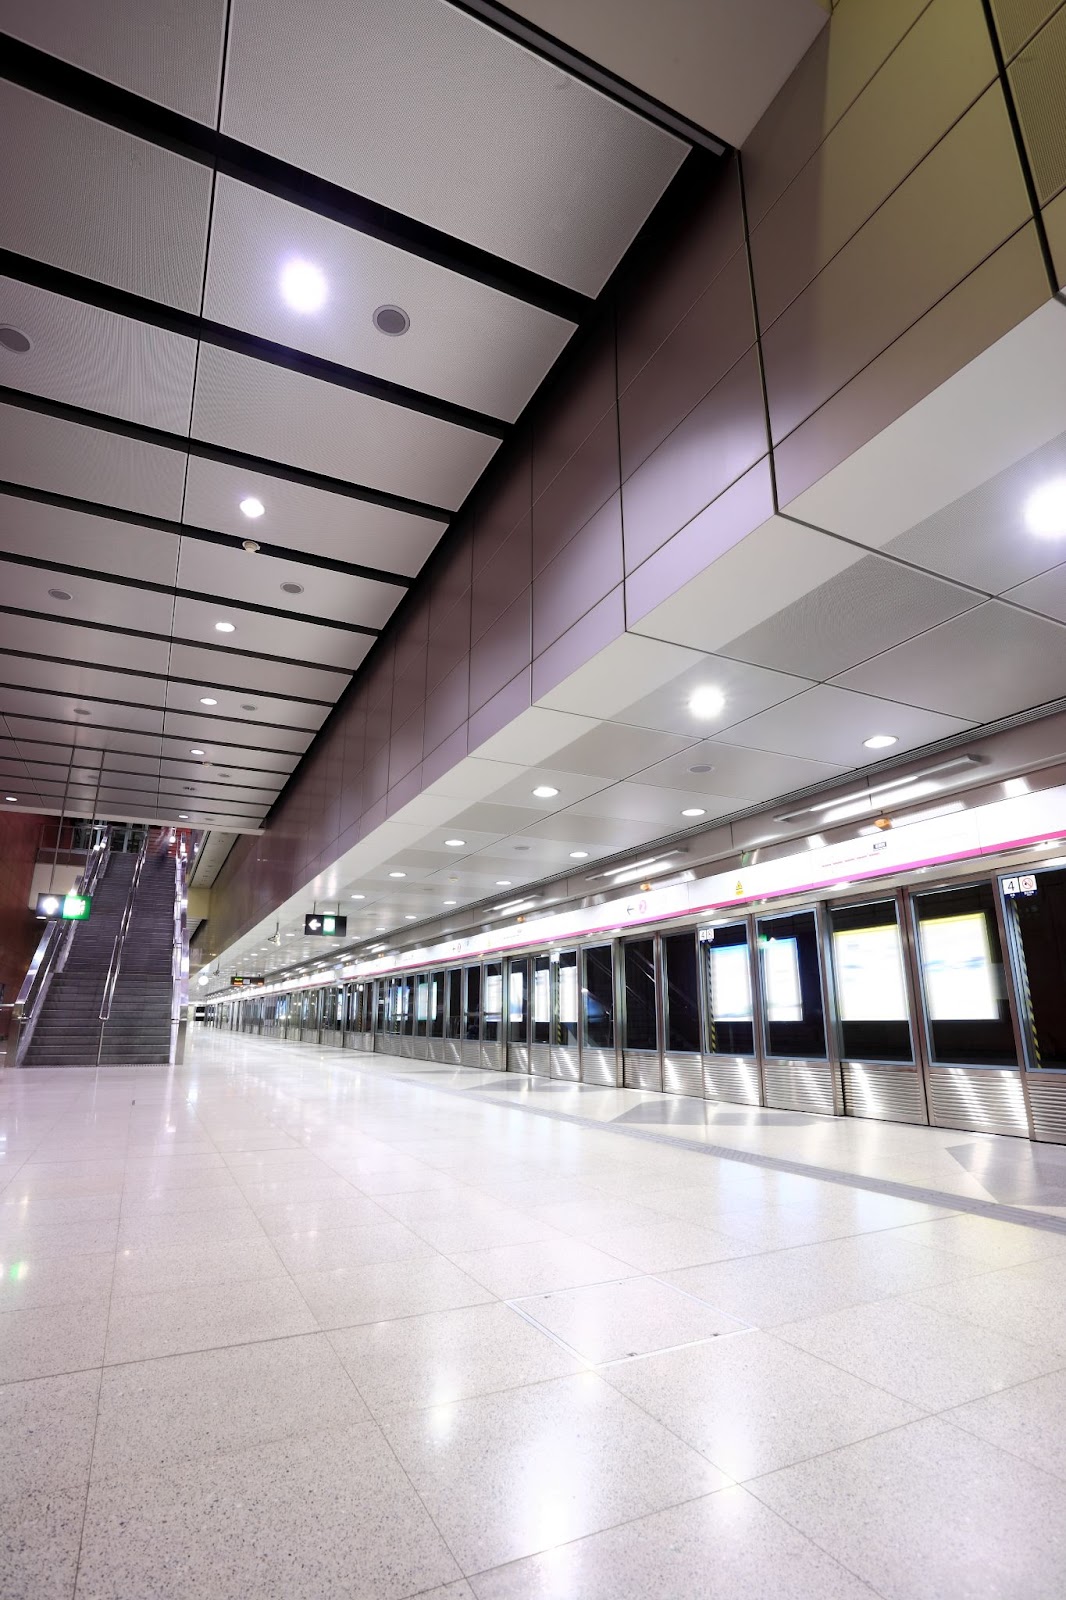 Lighting for navigation at train stations and public transport